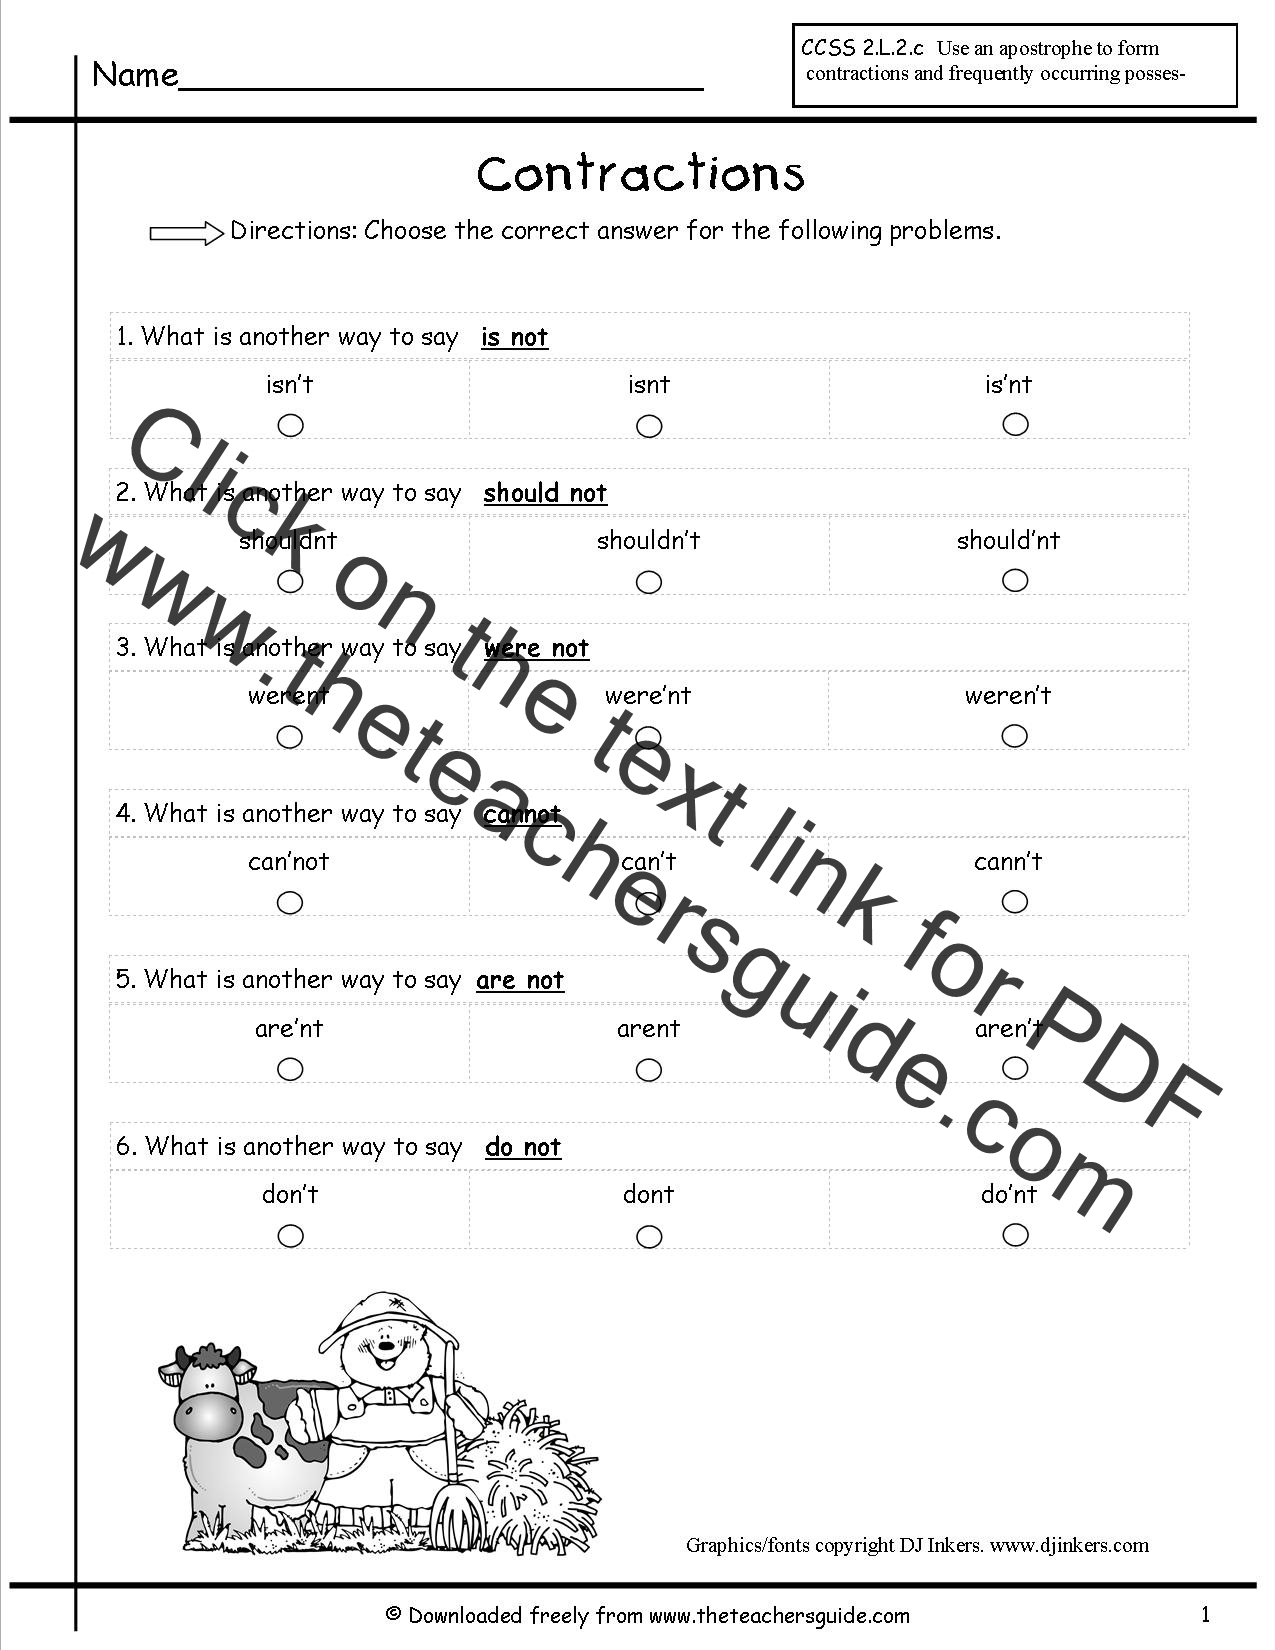 contractions-worksheets-from-the-teacher-s-guide